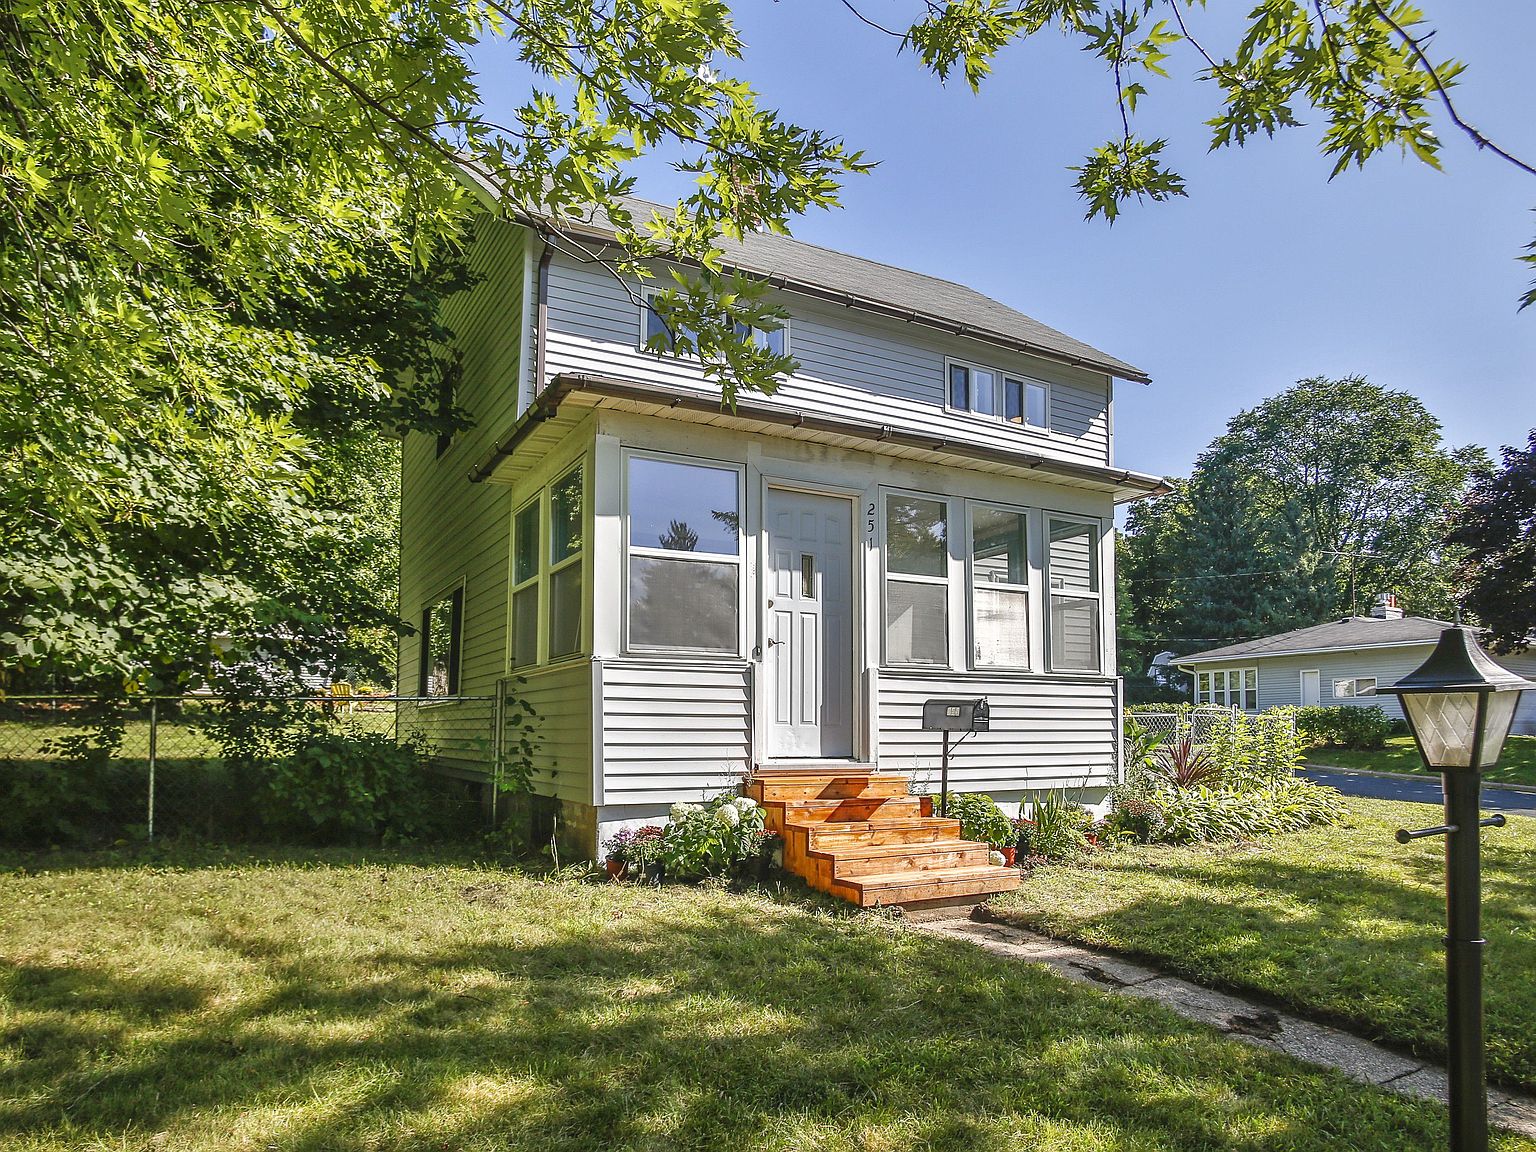 251 Union St, River Falls, WI 54022 | Zillow